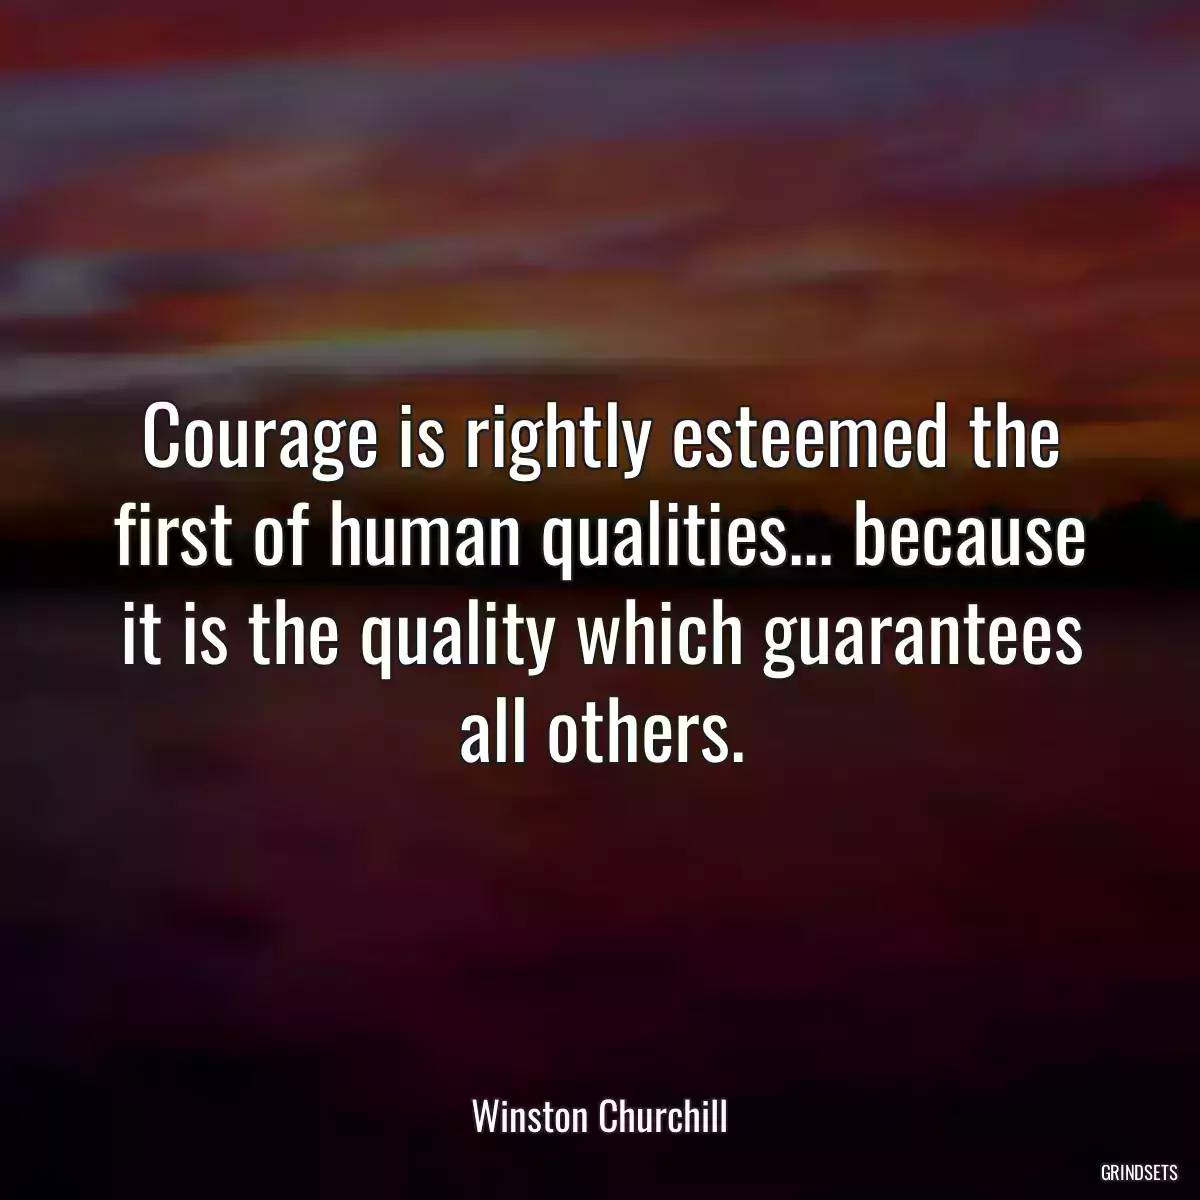 Courage is rightly esteemed the first of human qualities... because it is the quality which guarantees all others.